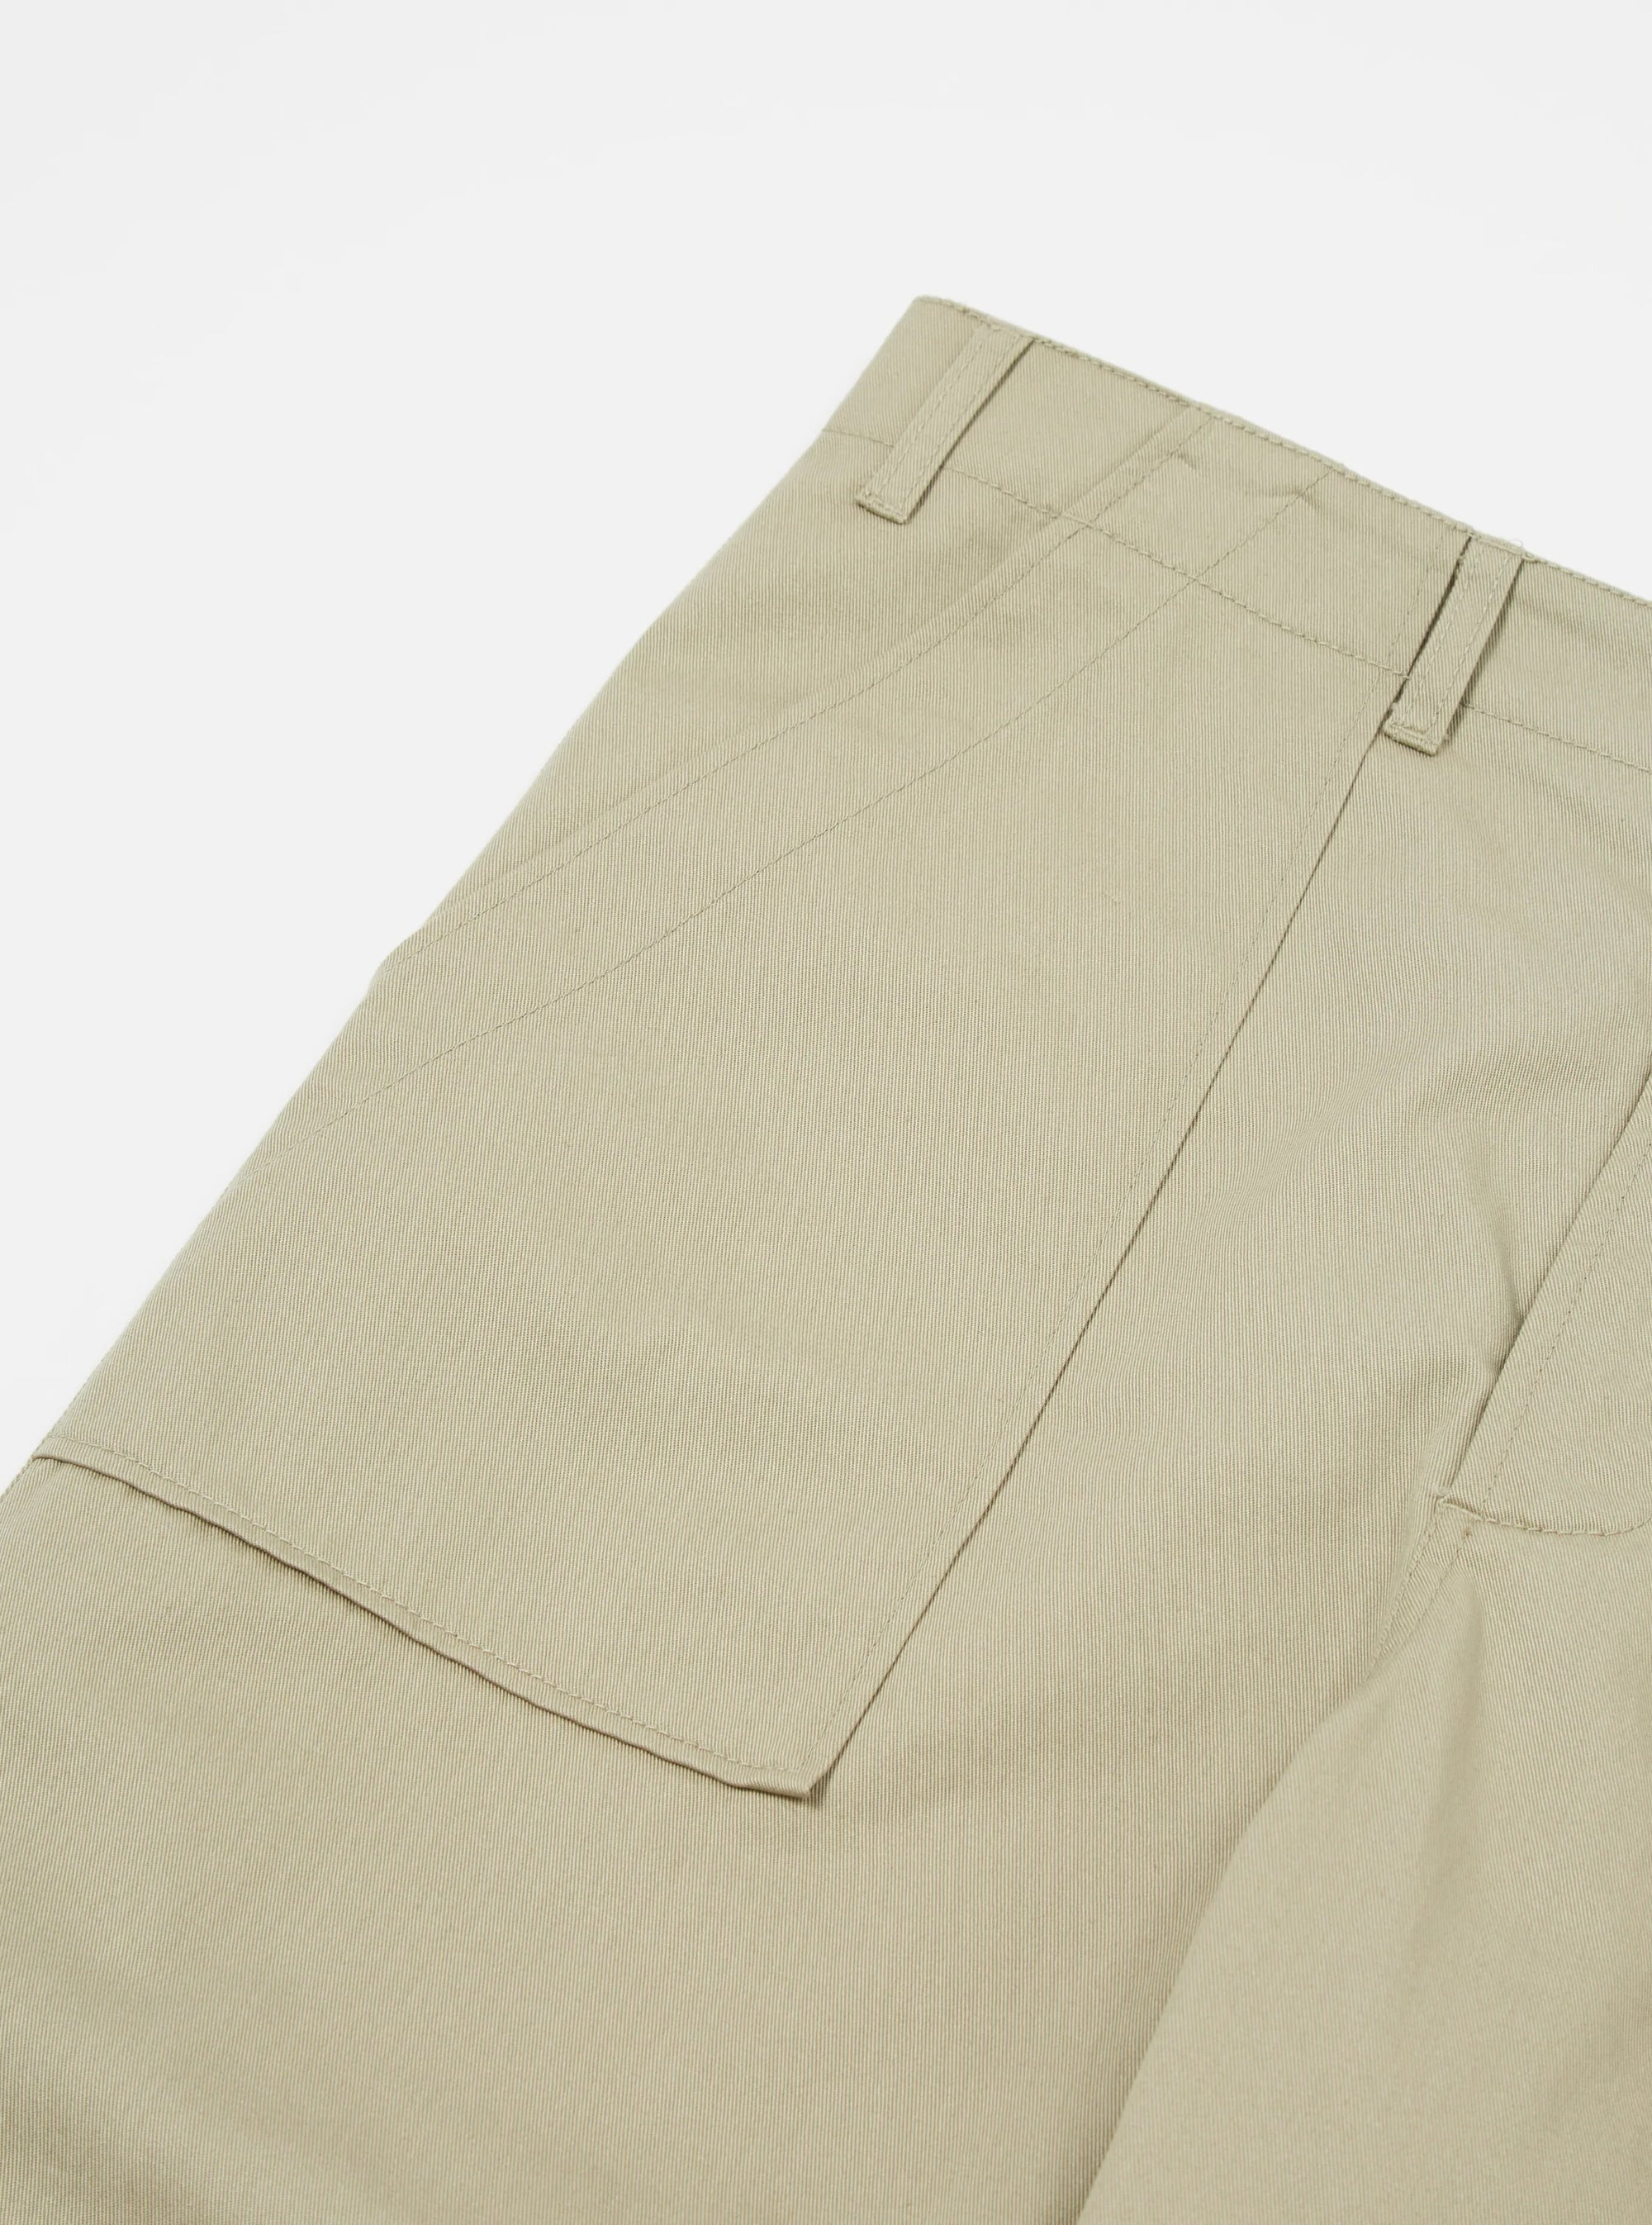 Twill Fatigue Pant STONE
• Product Code: REF 00132.
• Straight fit.
• Zip fly.
• Buckle waist adjusters.
• Two front patch pockets.
• Two rear buttoned flap patch pockets.
• Fabric Content: 100% Cotton, 100% Cotton Trim.
• Washcare: Wash at 30 degrees. Do not bleach. Do not tumble dry. Warm iron. Do not dry clean. Wash like colours together.  UNIVERSAL WORKS